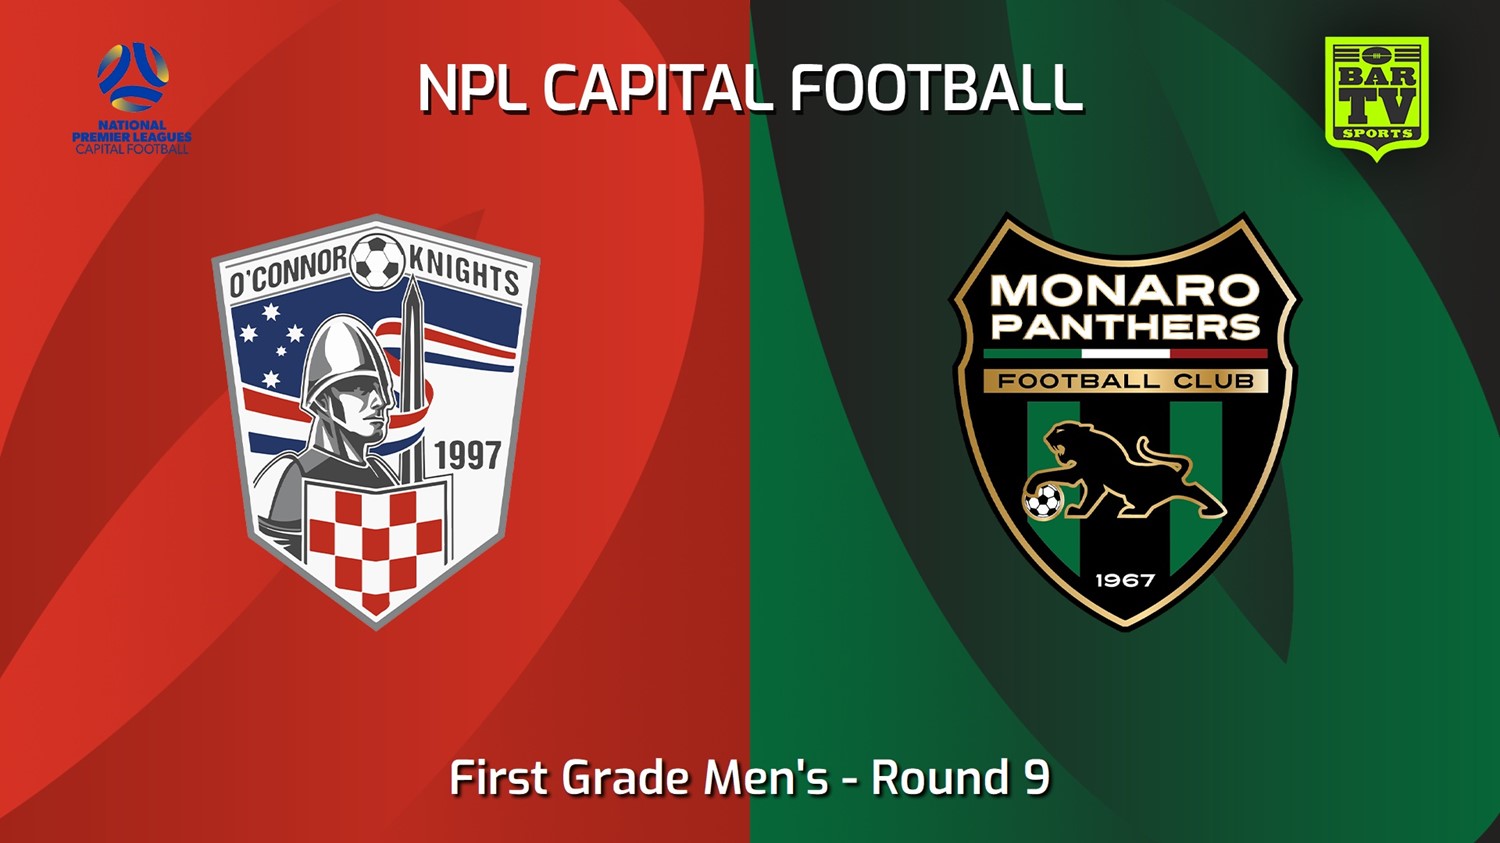 240601-video-Capital NPL Round 9 - O'Connor Knights SC v Monaro Panthers Minigame Slate Image